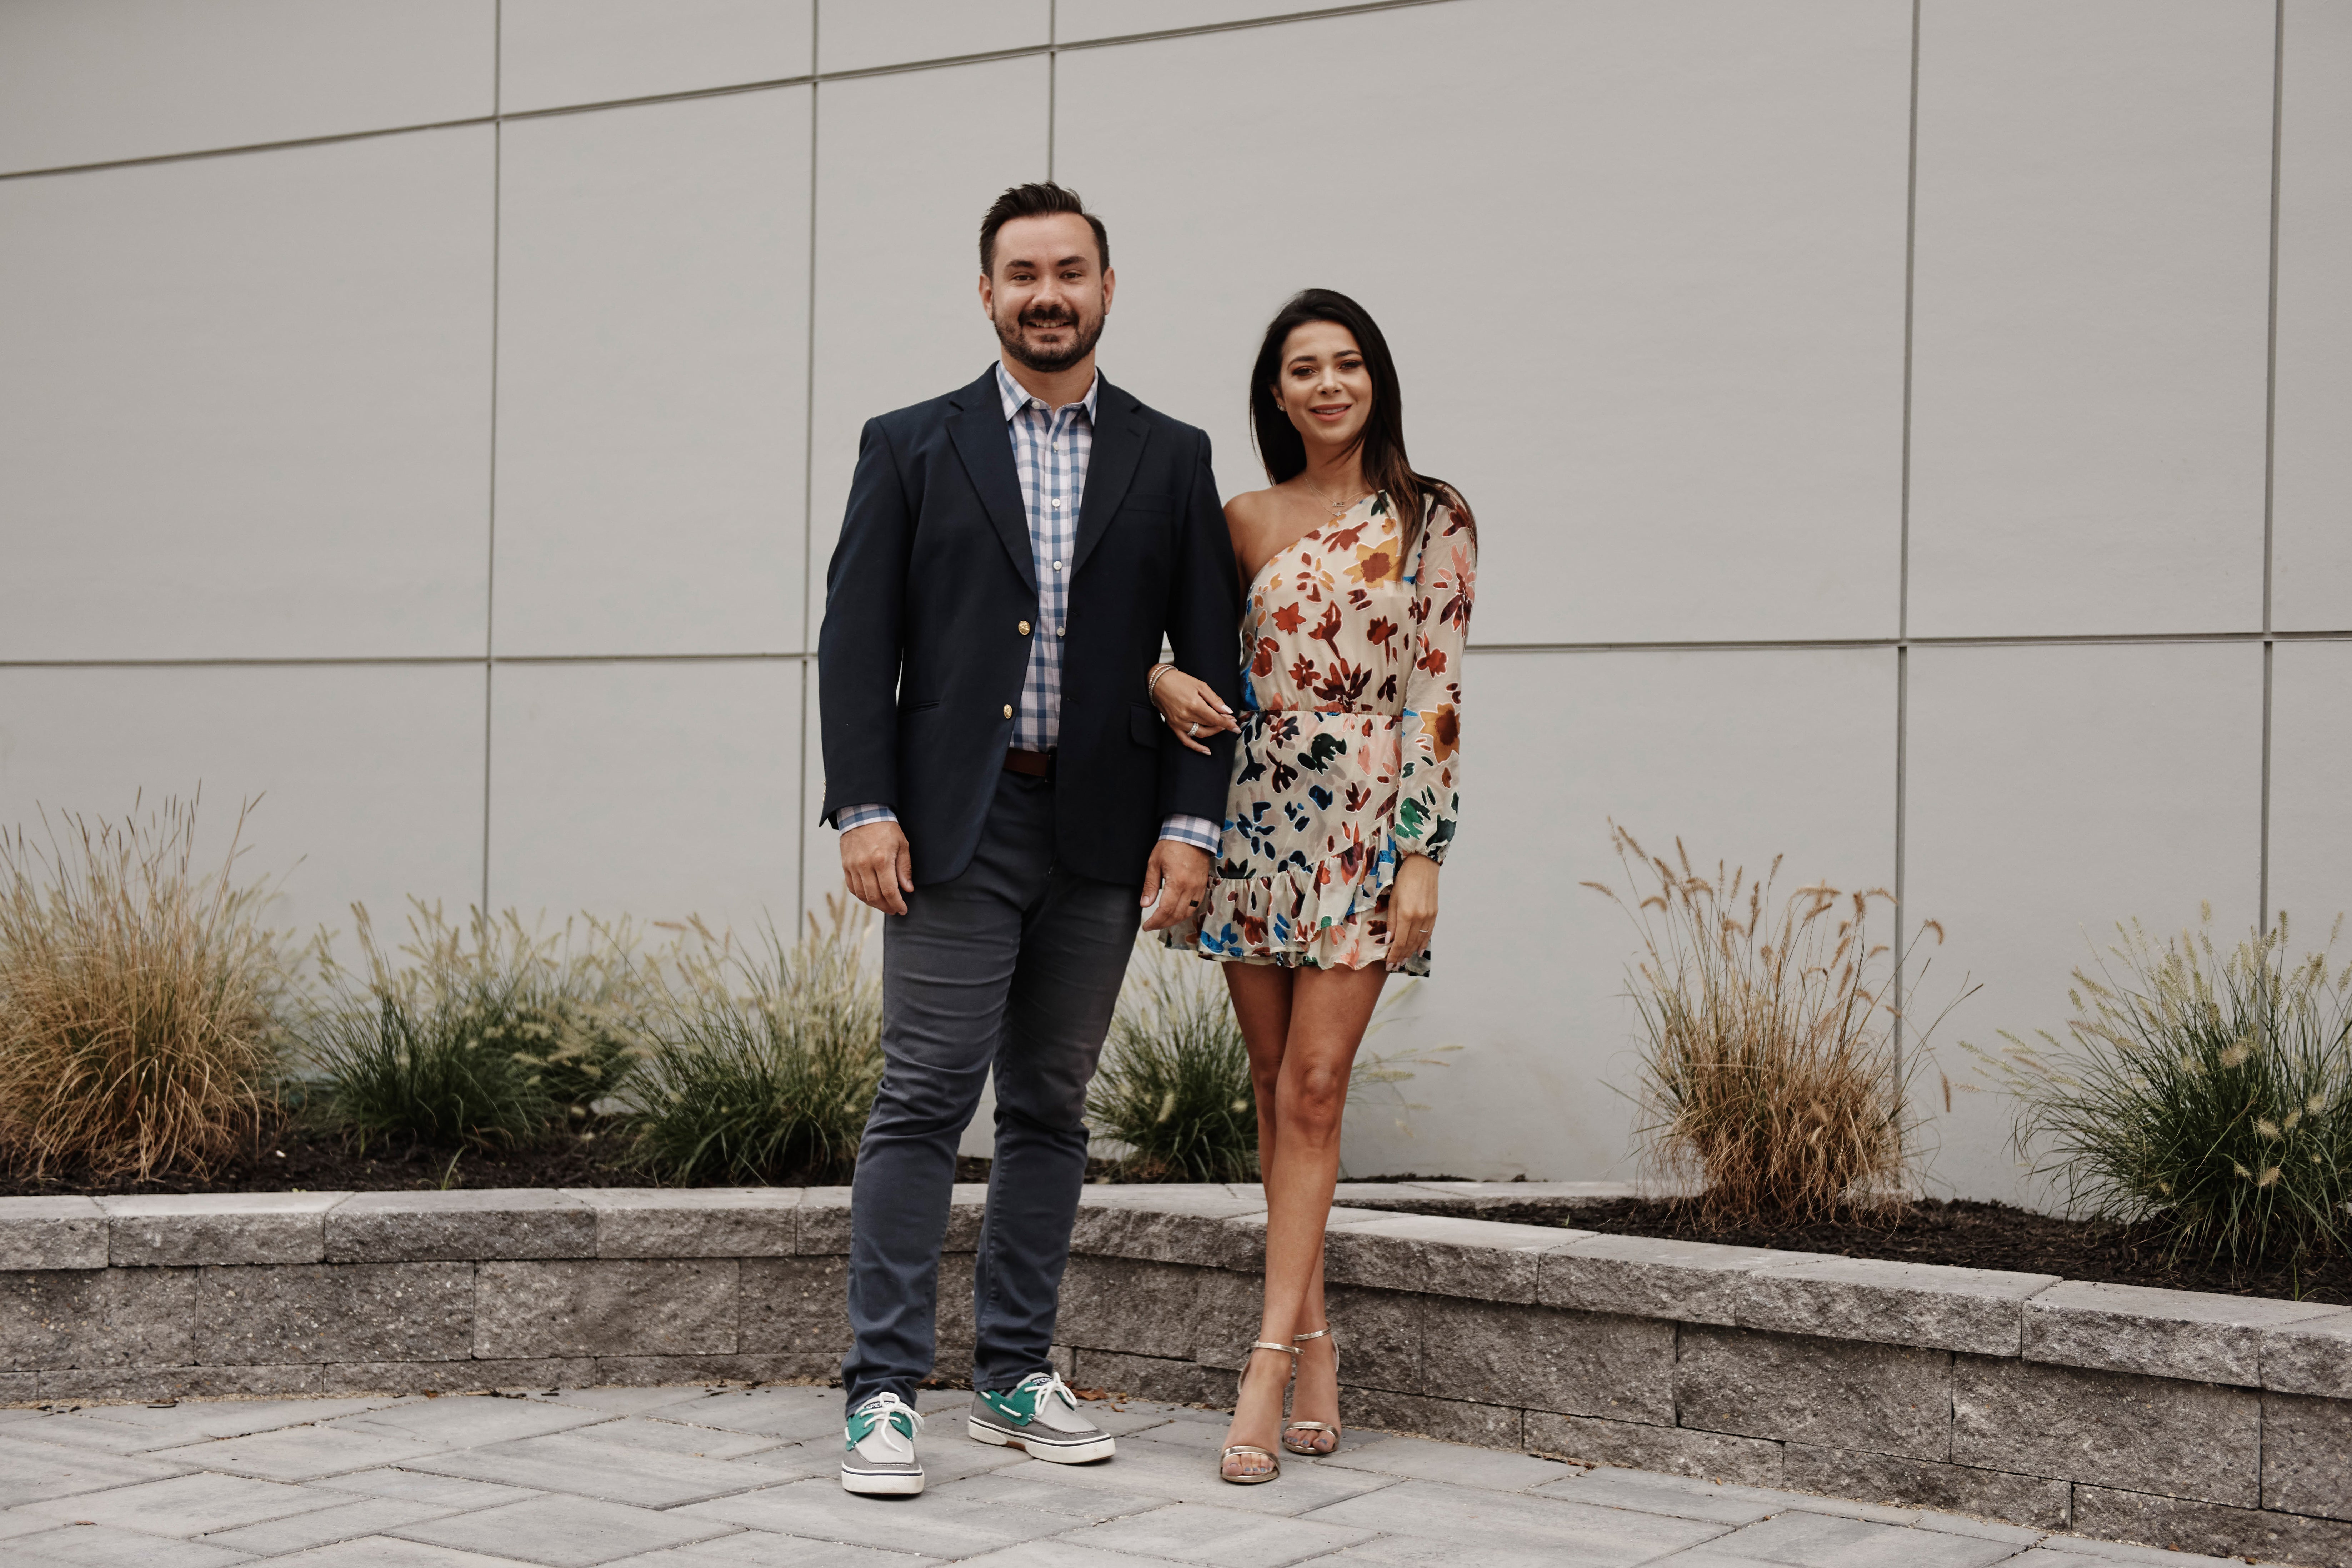 Chris, wearing a jacket and jeans, and Alyssa, wearing a short floral dress, in a promo photo for 'Married at First Sight' Season 14